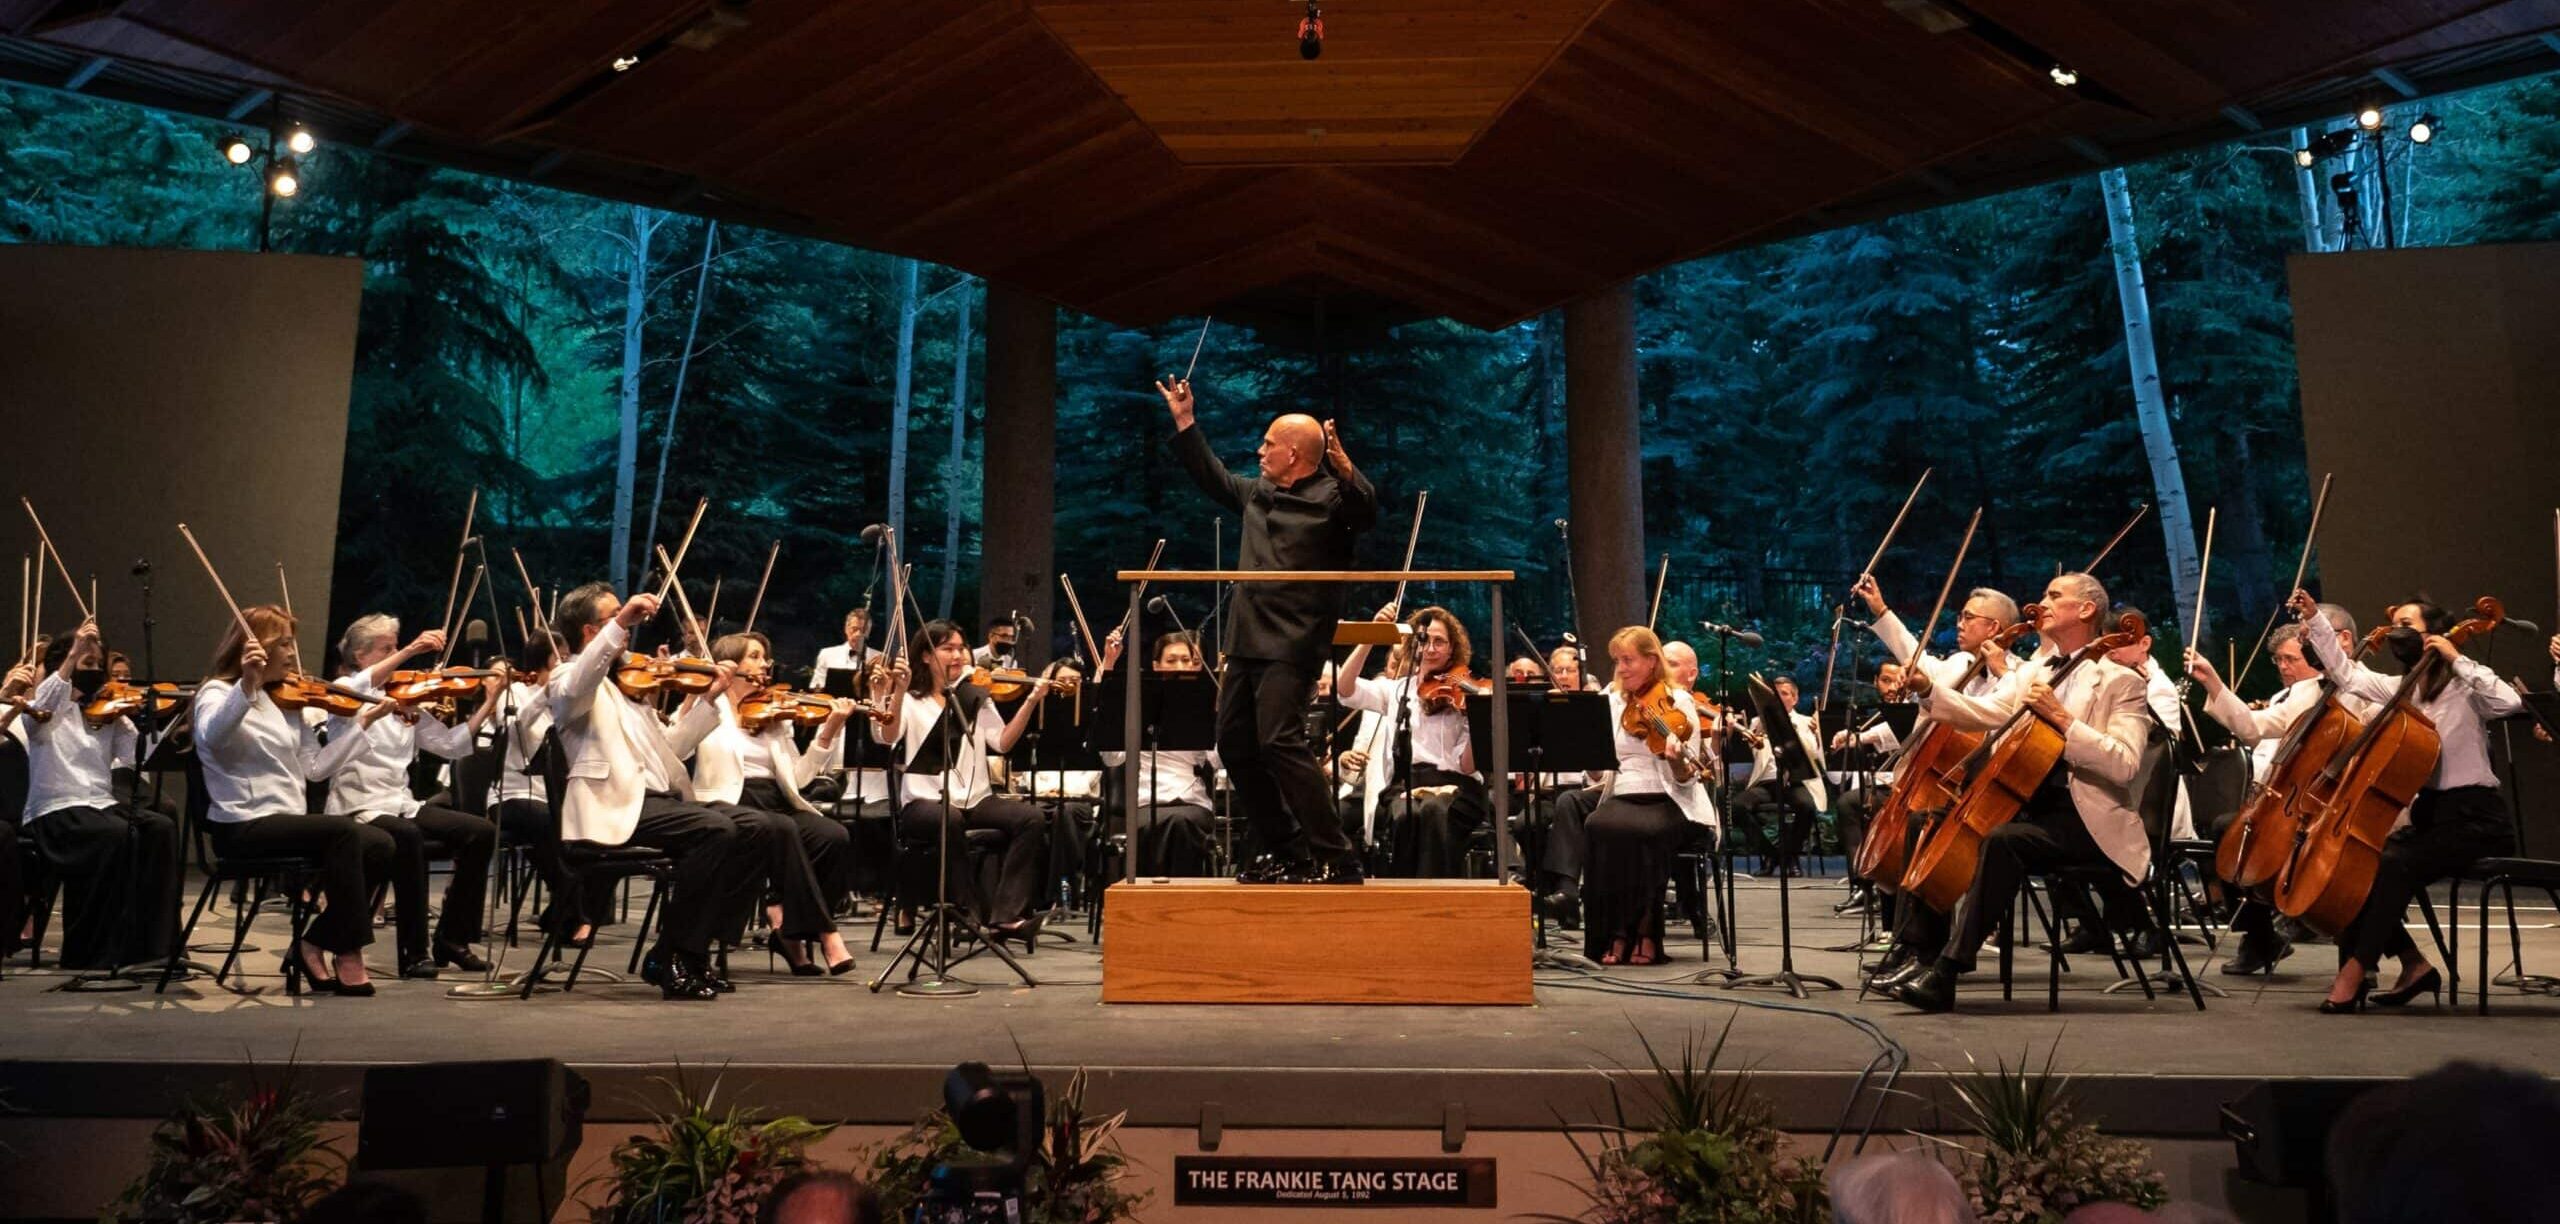 Symphony orchestra performing in a wooded area.